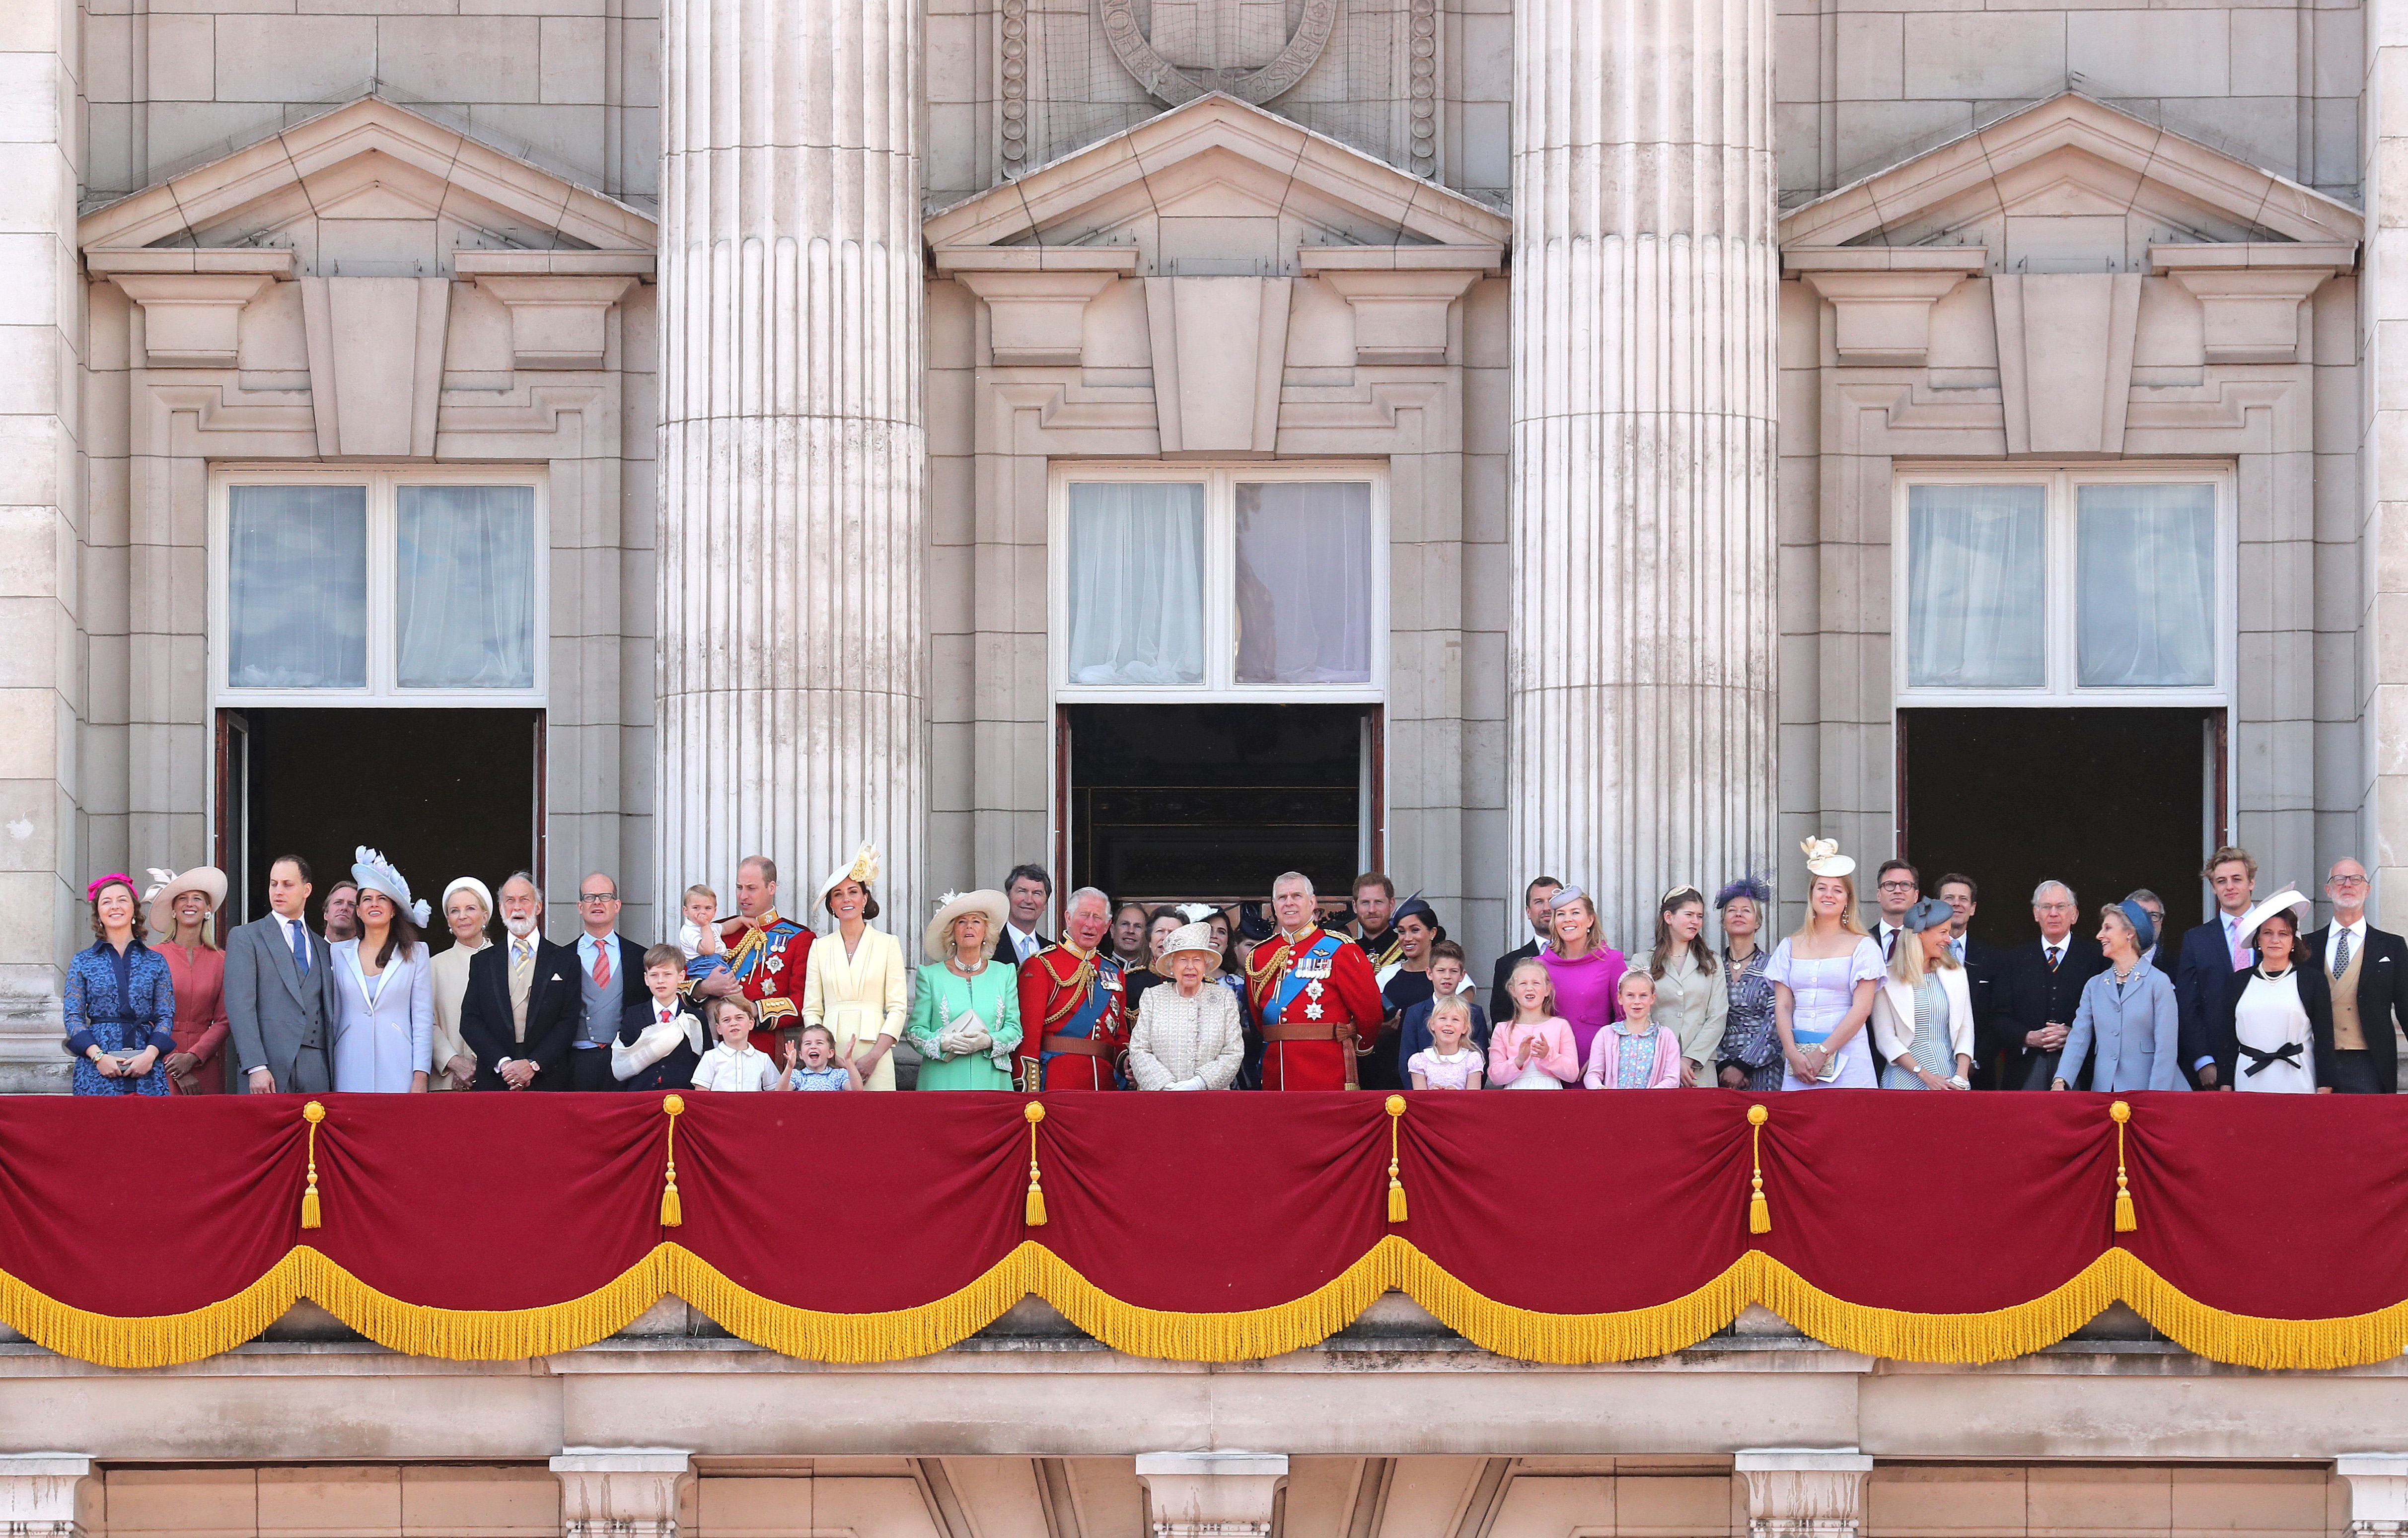 The royal family on the balcony of Buckingham Palace to watch a fly-past of aircraft by the Royal Air Force during Trooping The Colour, the Queen's annual birthday parade, on June 08, 2019 in London, England | Source: Getty Images